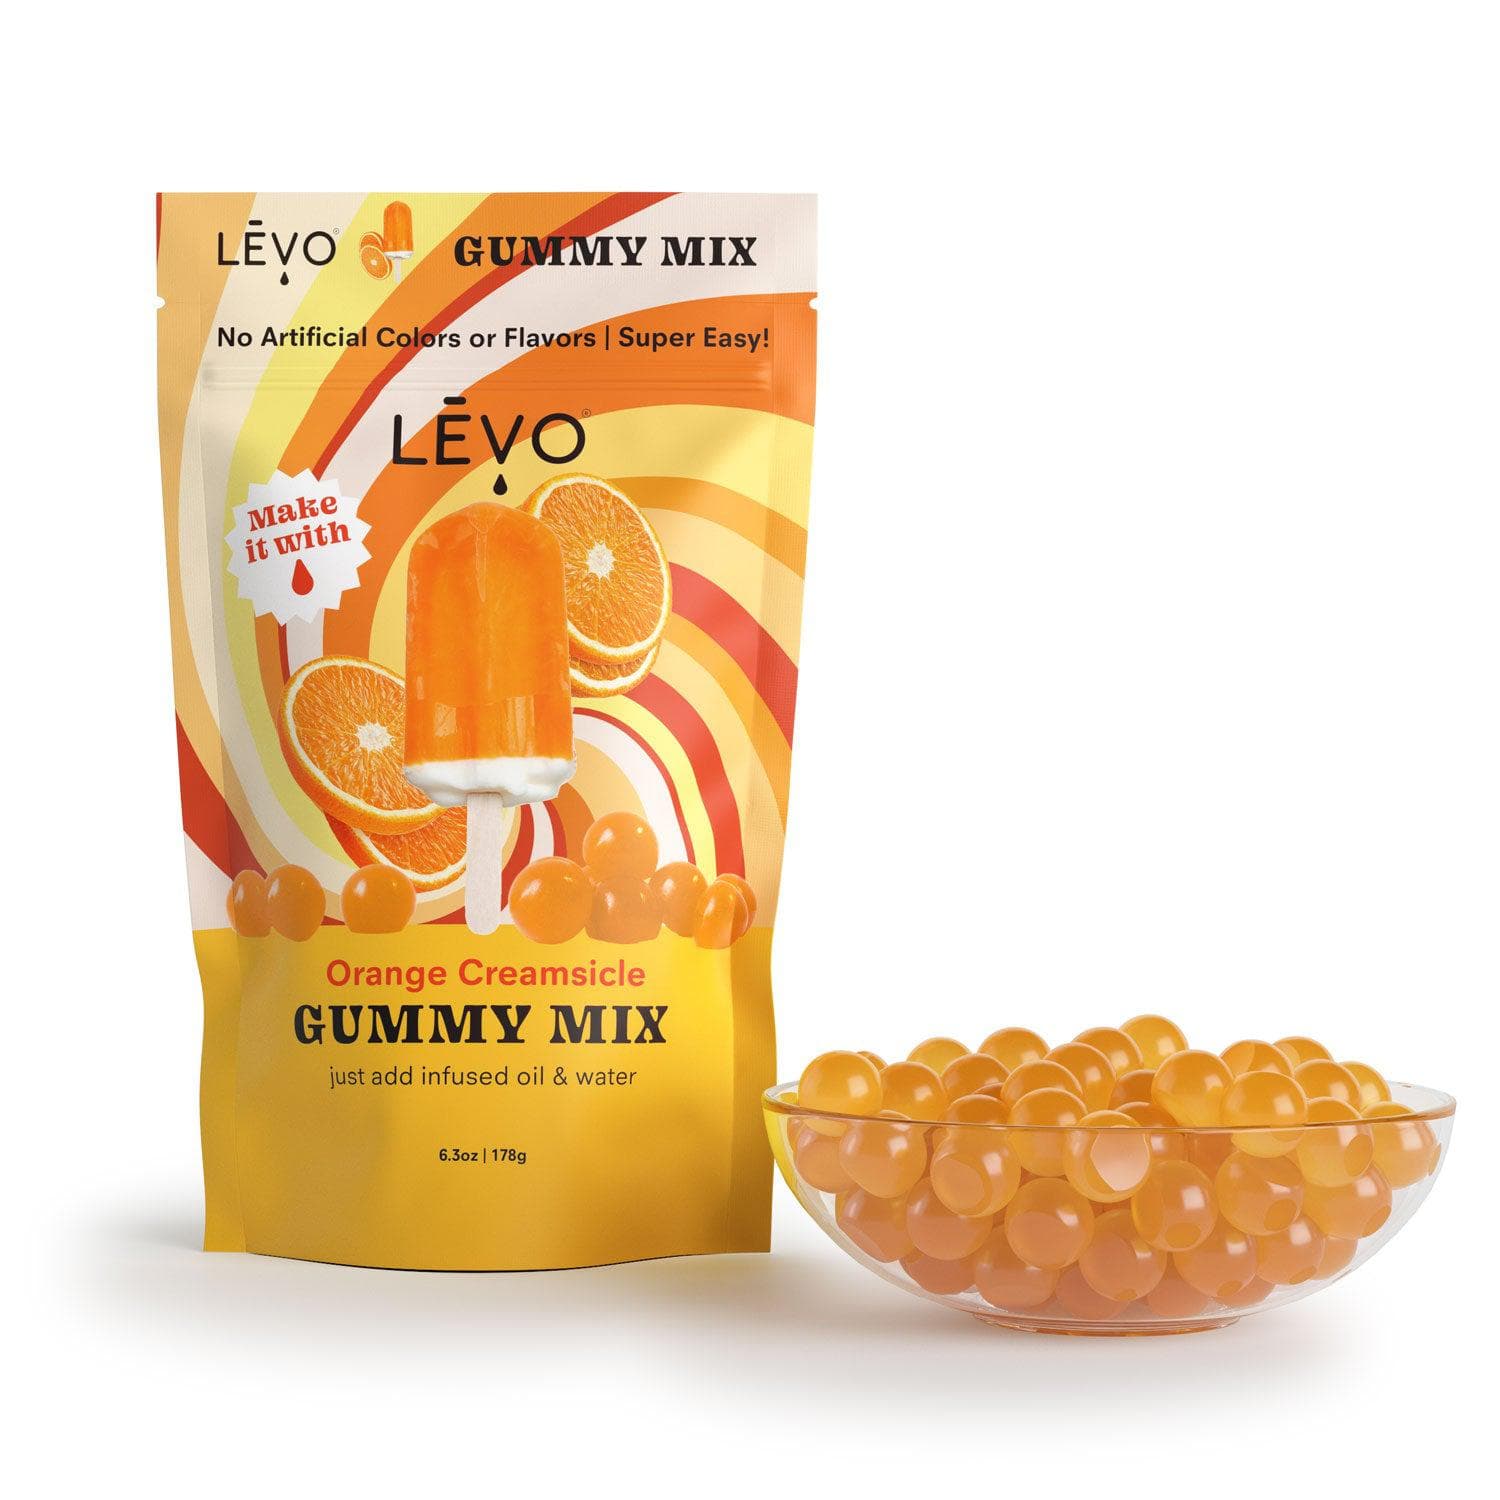 LEVO Gummy mix in Orange Creamsicle. Orange Creamsicle Gummy Mix - Treat yourself to the creamy and citrusy goodness of orange creamsicles with this LĒVO gummy mix.